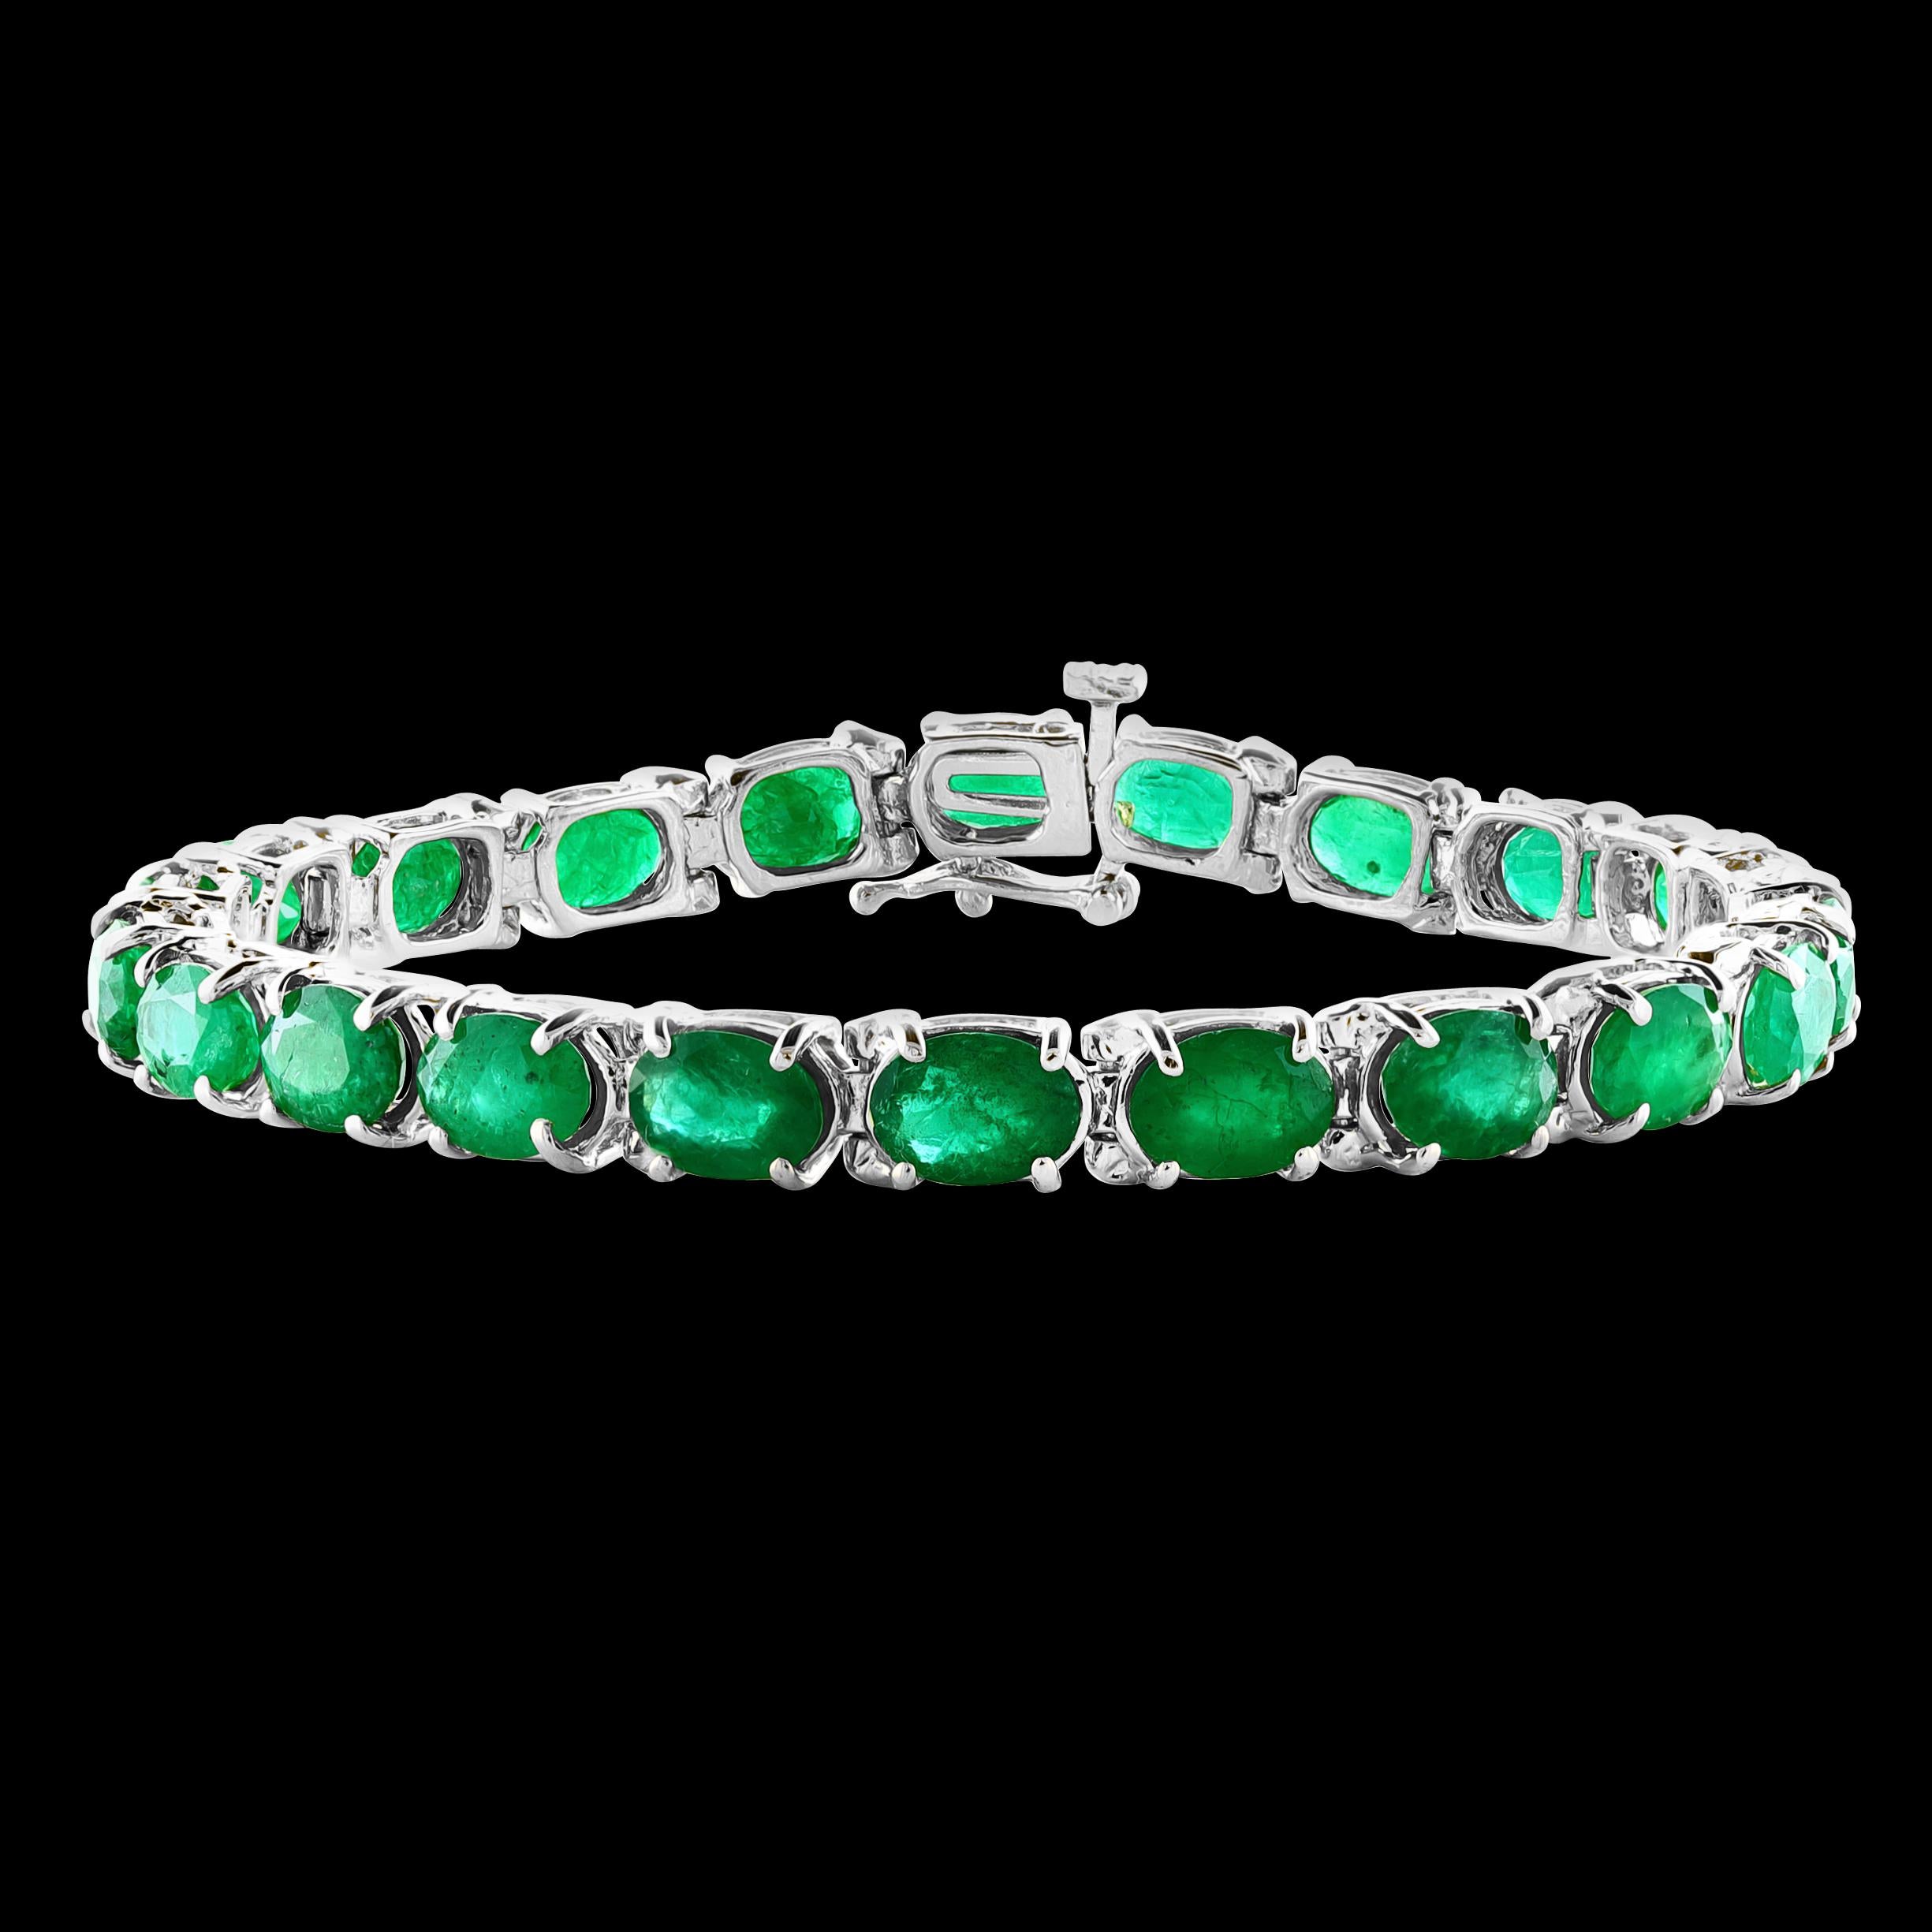  This exceptionally affordable Tennis  bracelet has  21 stones of oval  Emeralds  .  Total weight of the Emeralds is  approximately 28 carat. 
The bracelet is expertly crafted with 19 grams of  14 karat White  gold . Have a safety clasp .
Standard 7